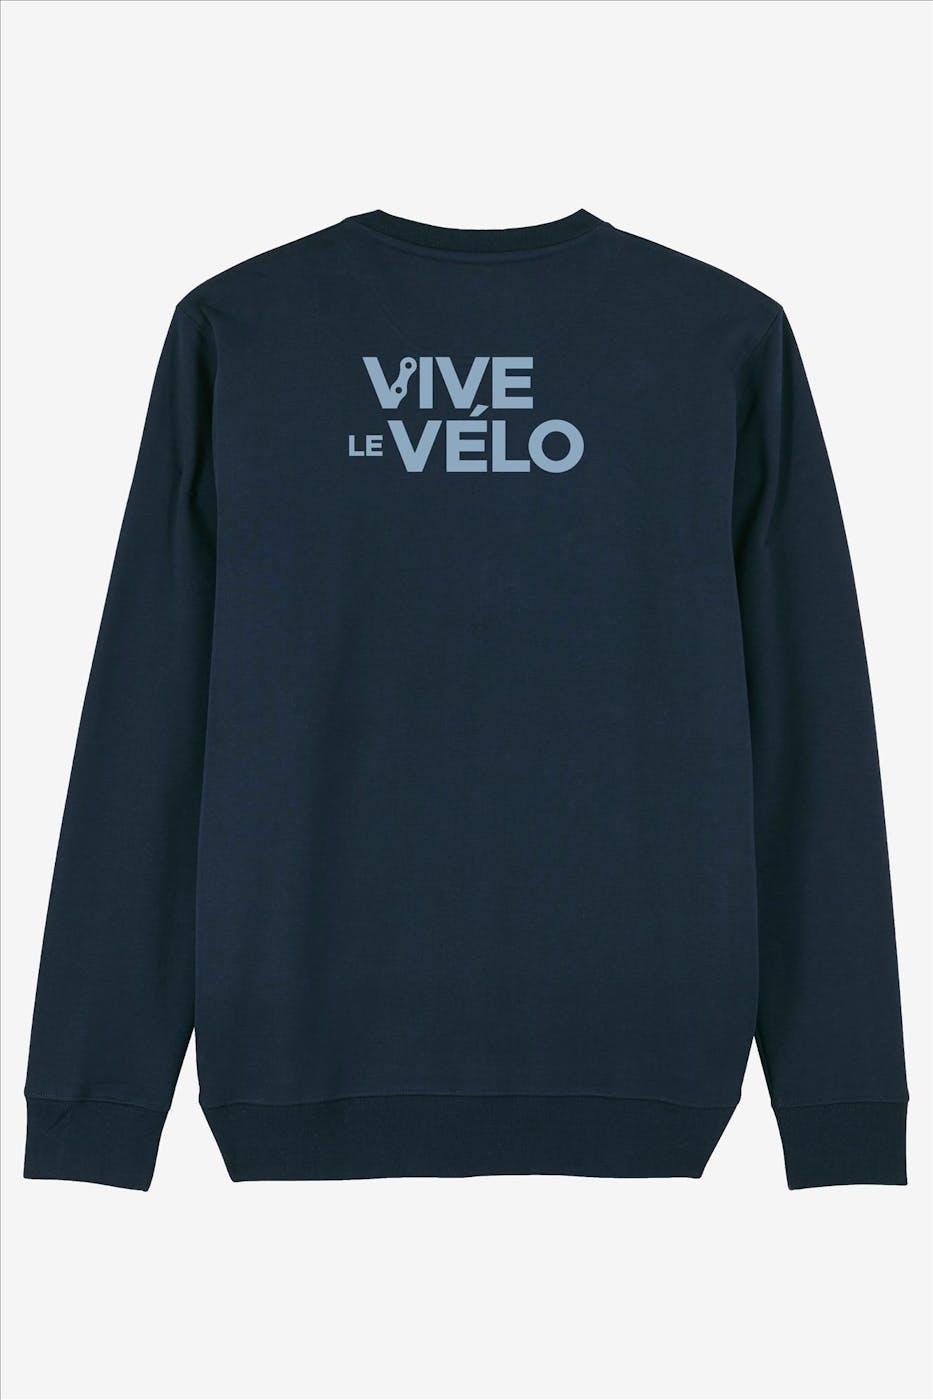 Vive le vélo - Donkerblauwe Squared Logo sweater